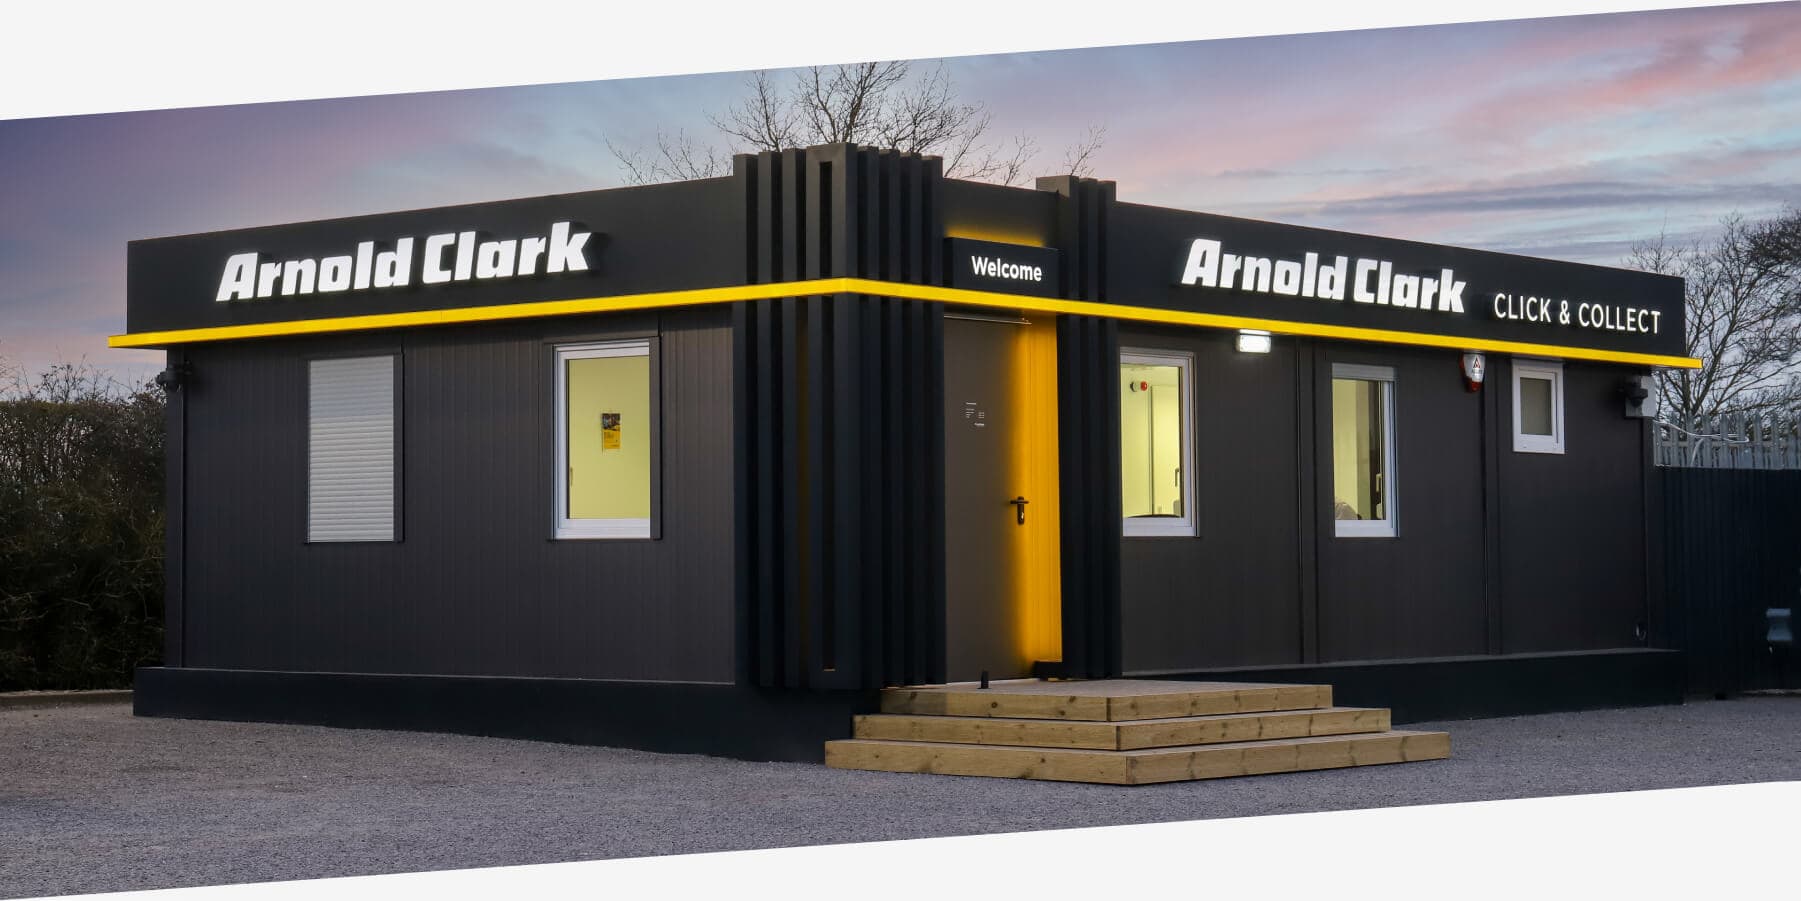 Arnold Clark Click & Collect location